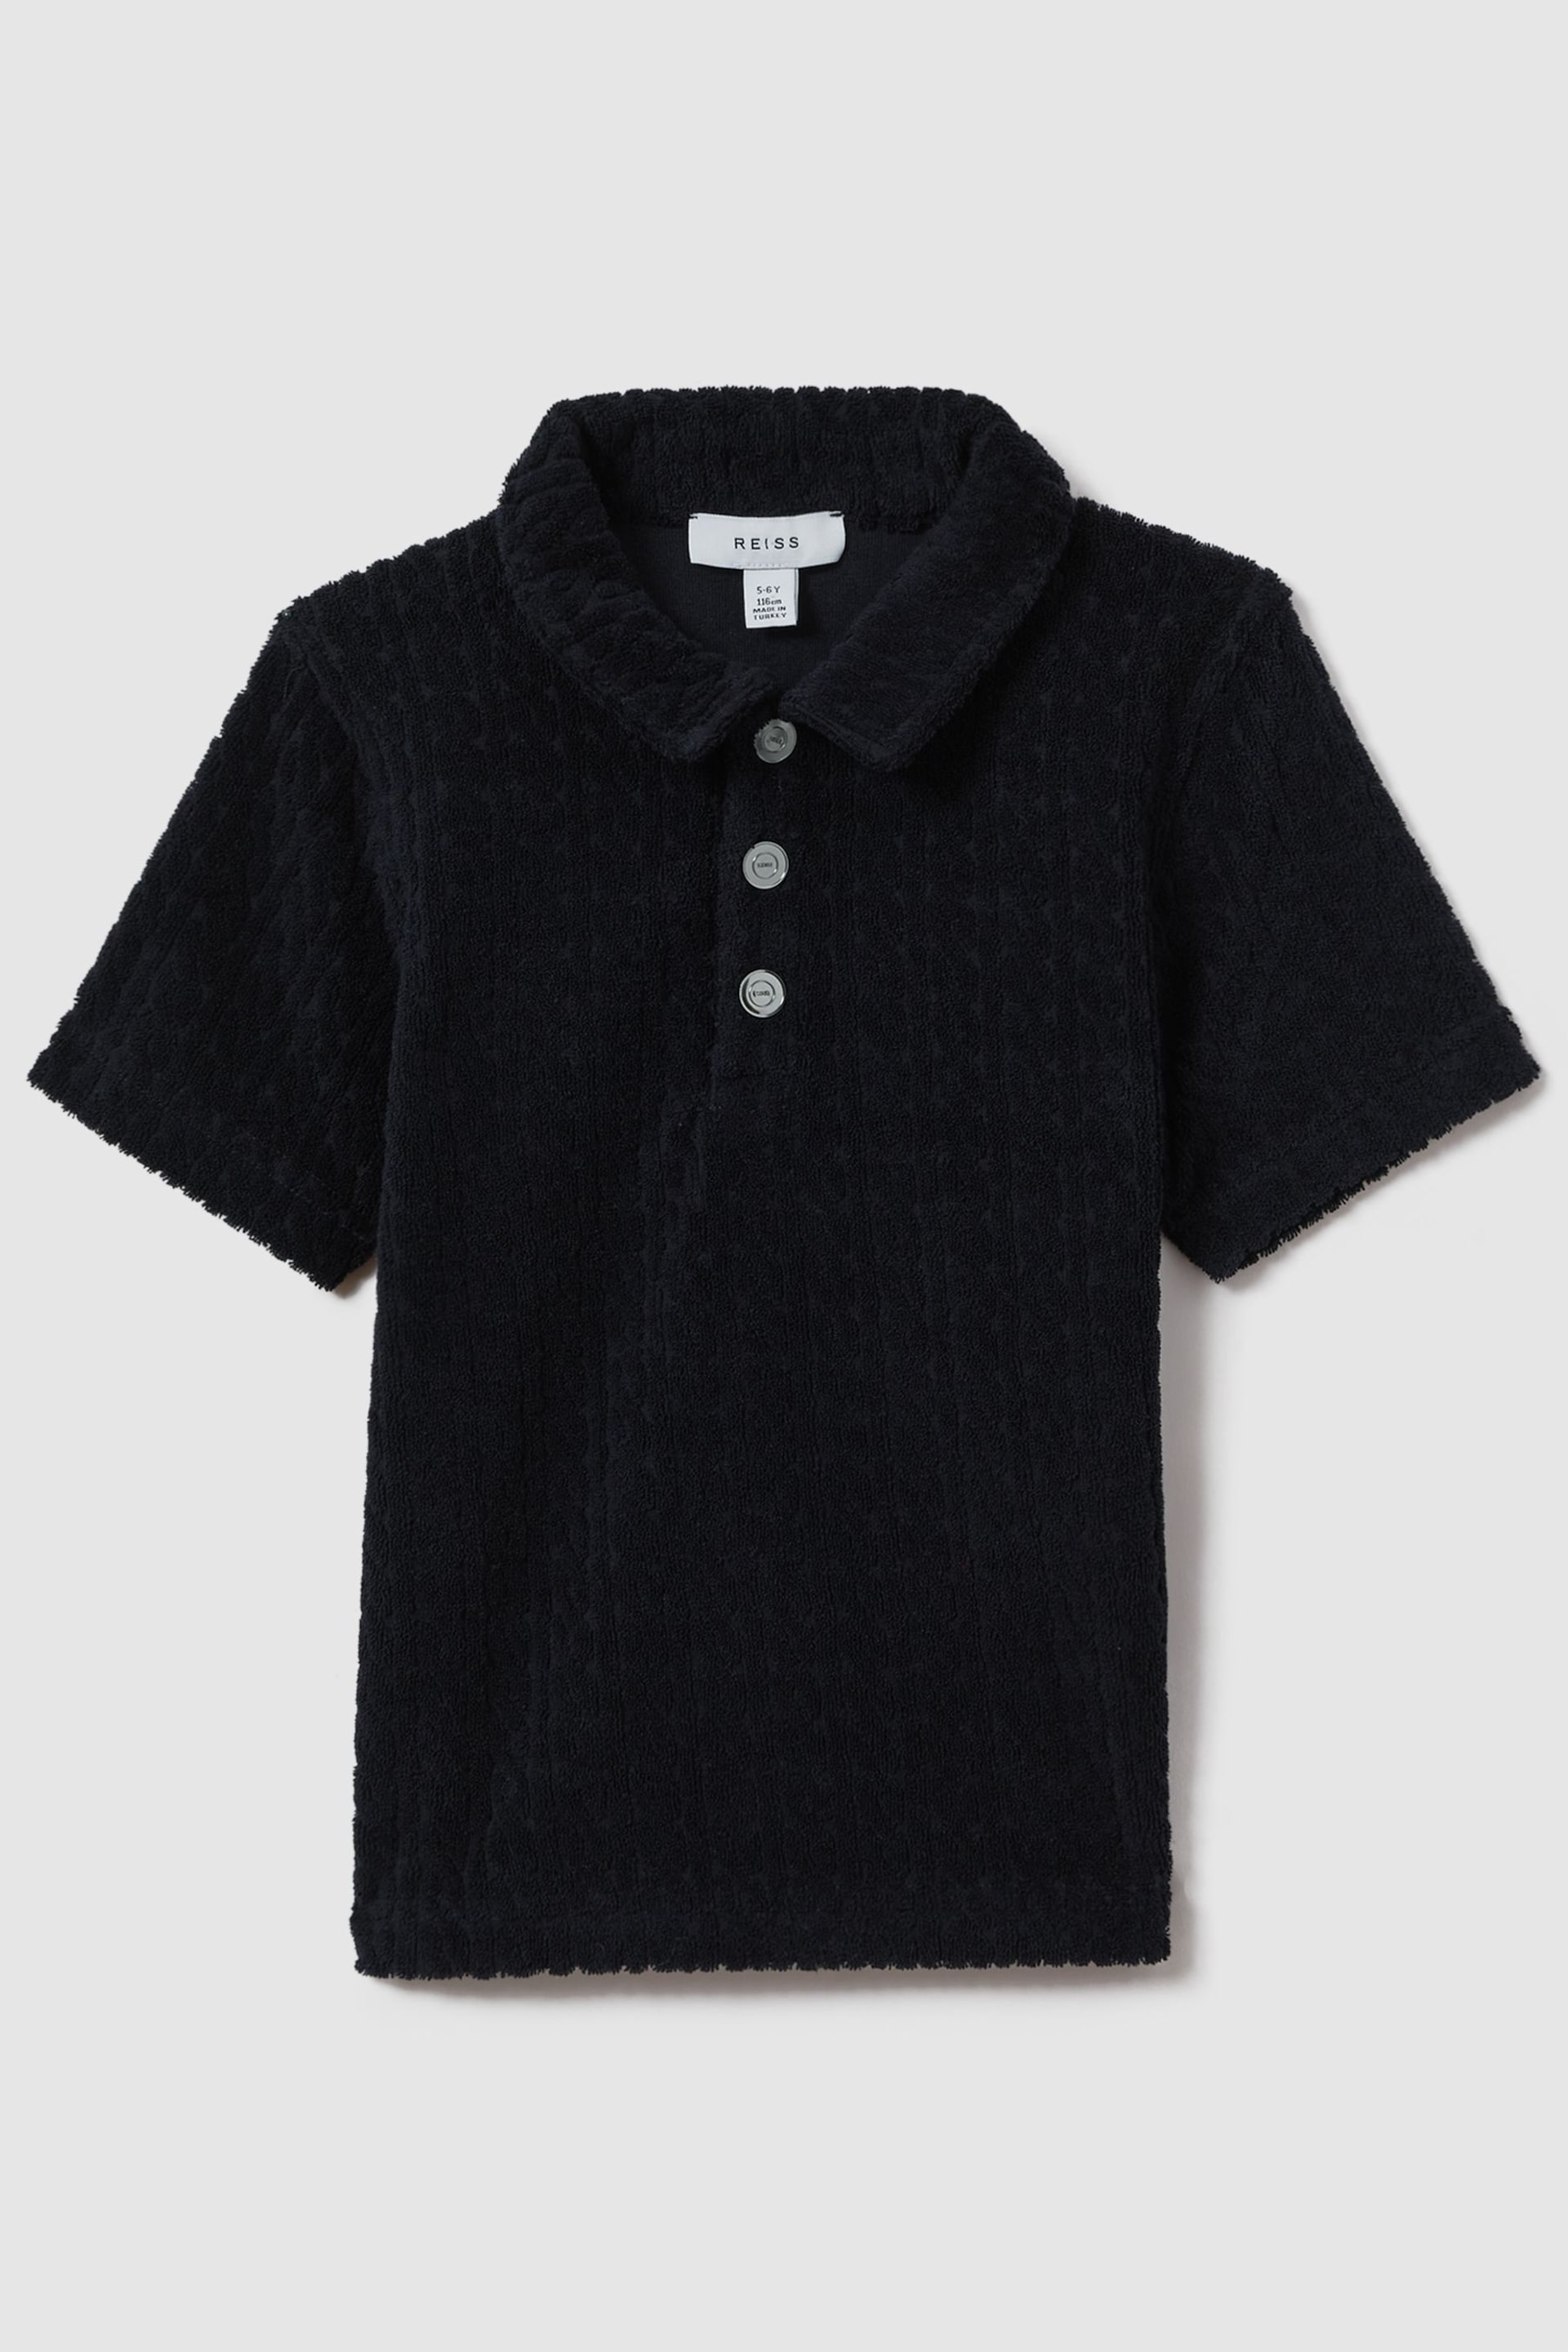 Reiss Navy Iggy Teen Towelling Polo Shirt - Image 1 of 4